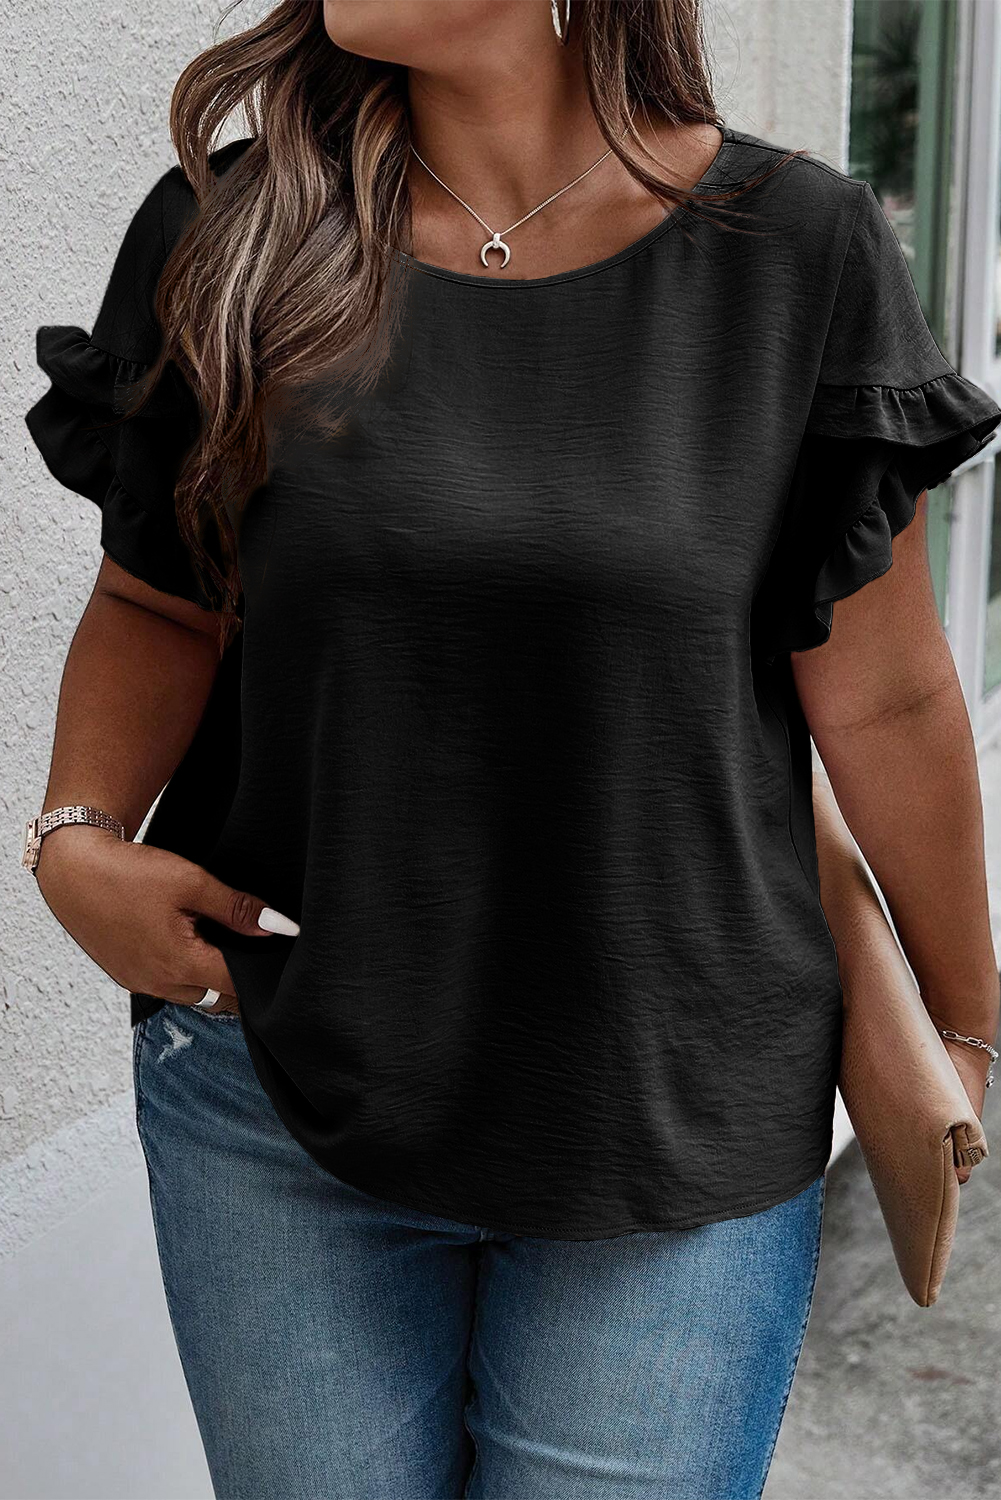 Shewin Wholesale New arrival Black Ruffled SHORT Sleeve Plus Size Top